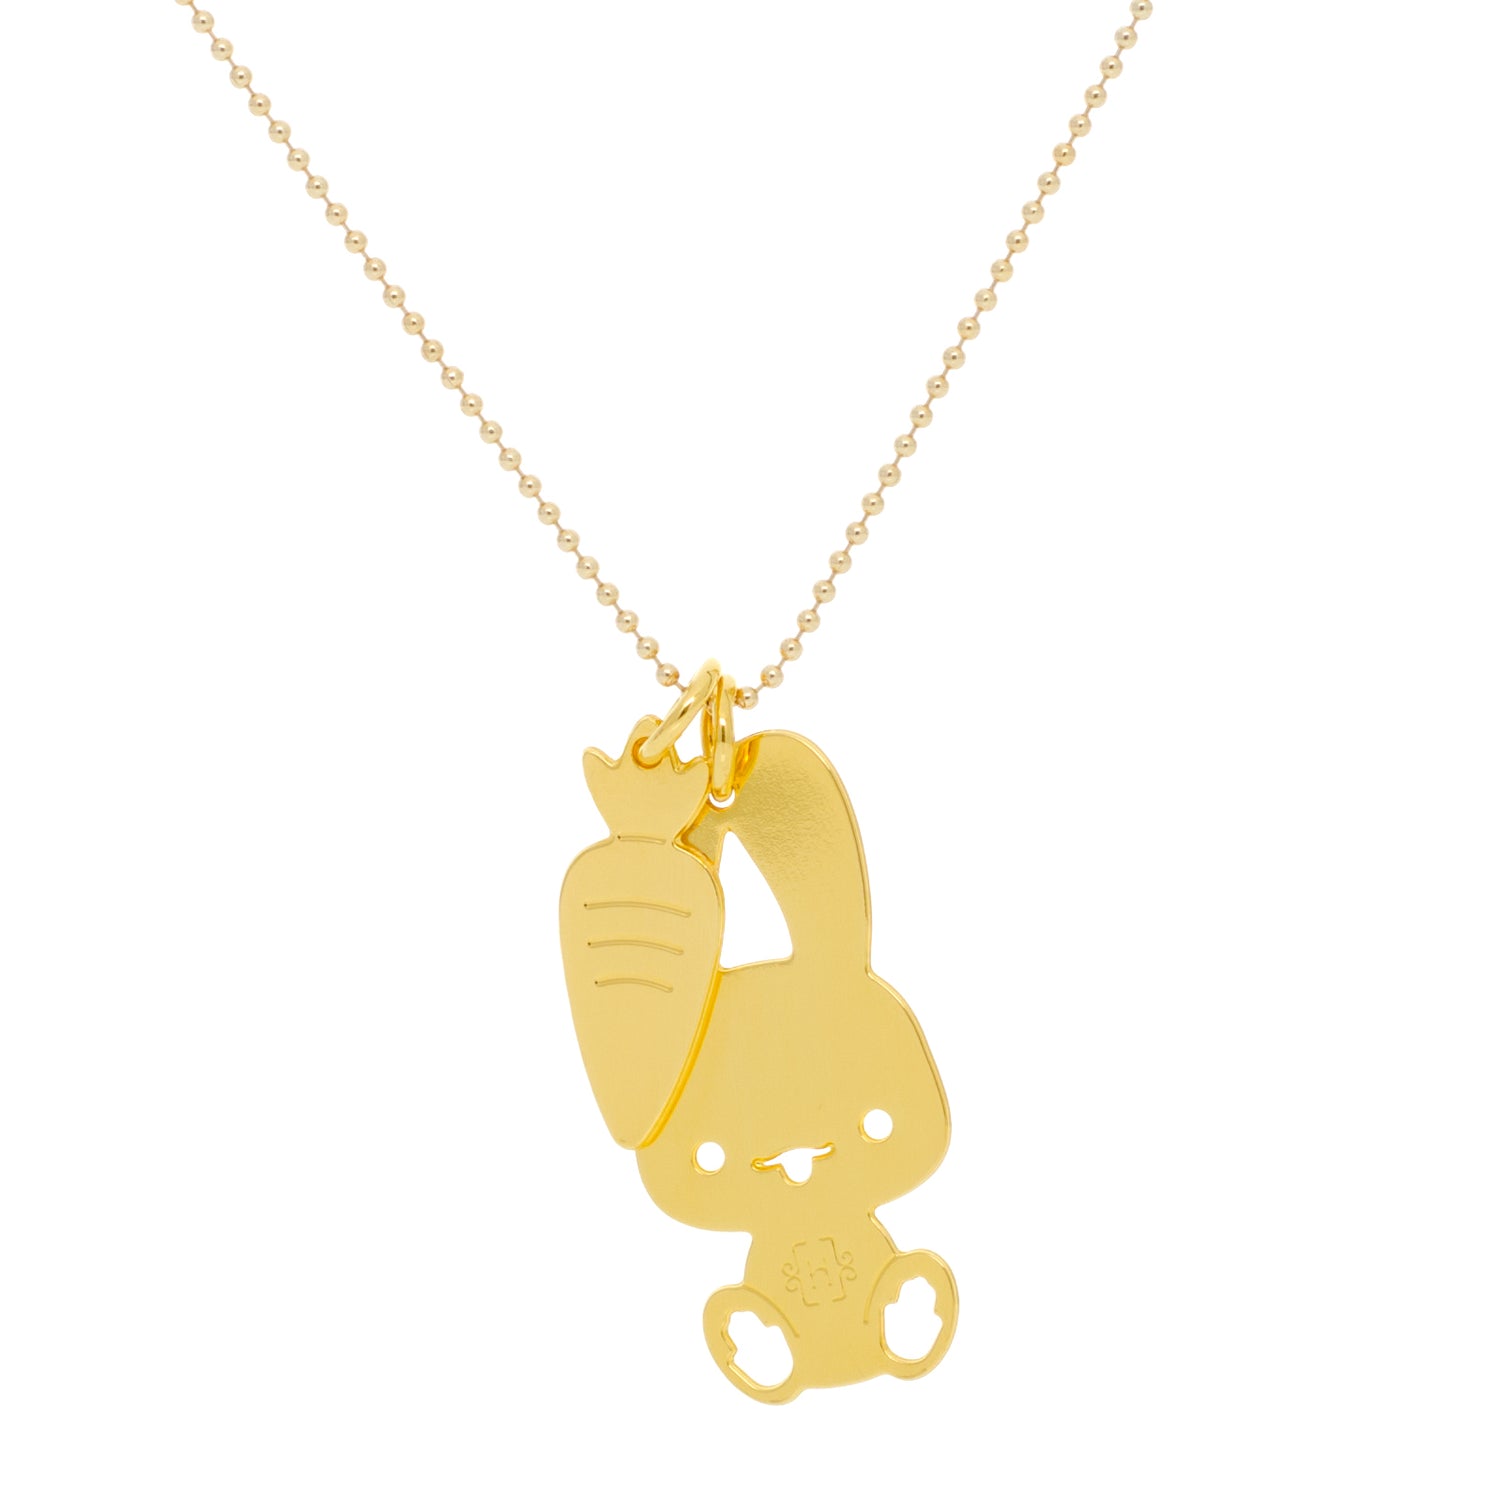 Bunny Good Luck Necklace